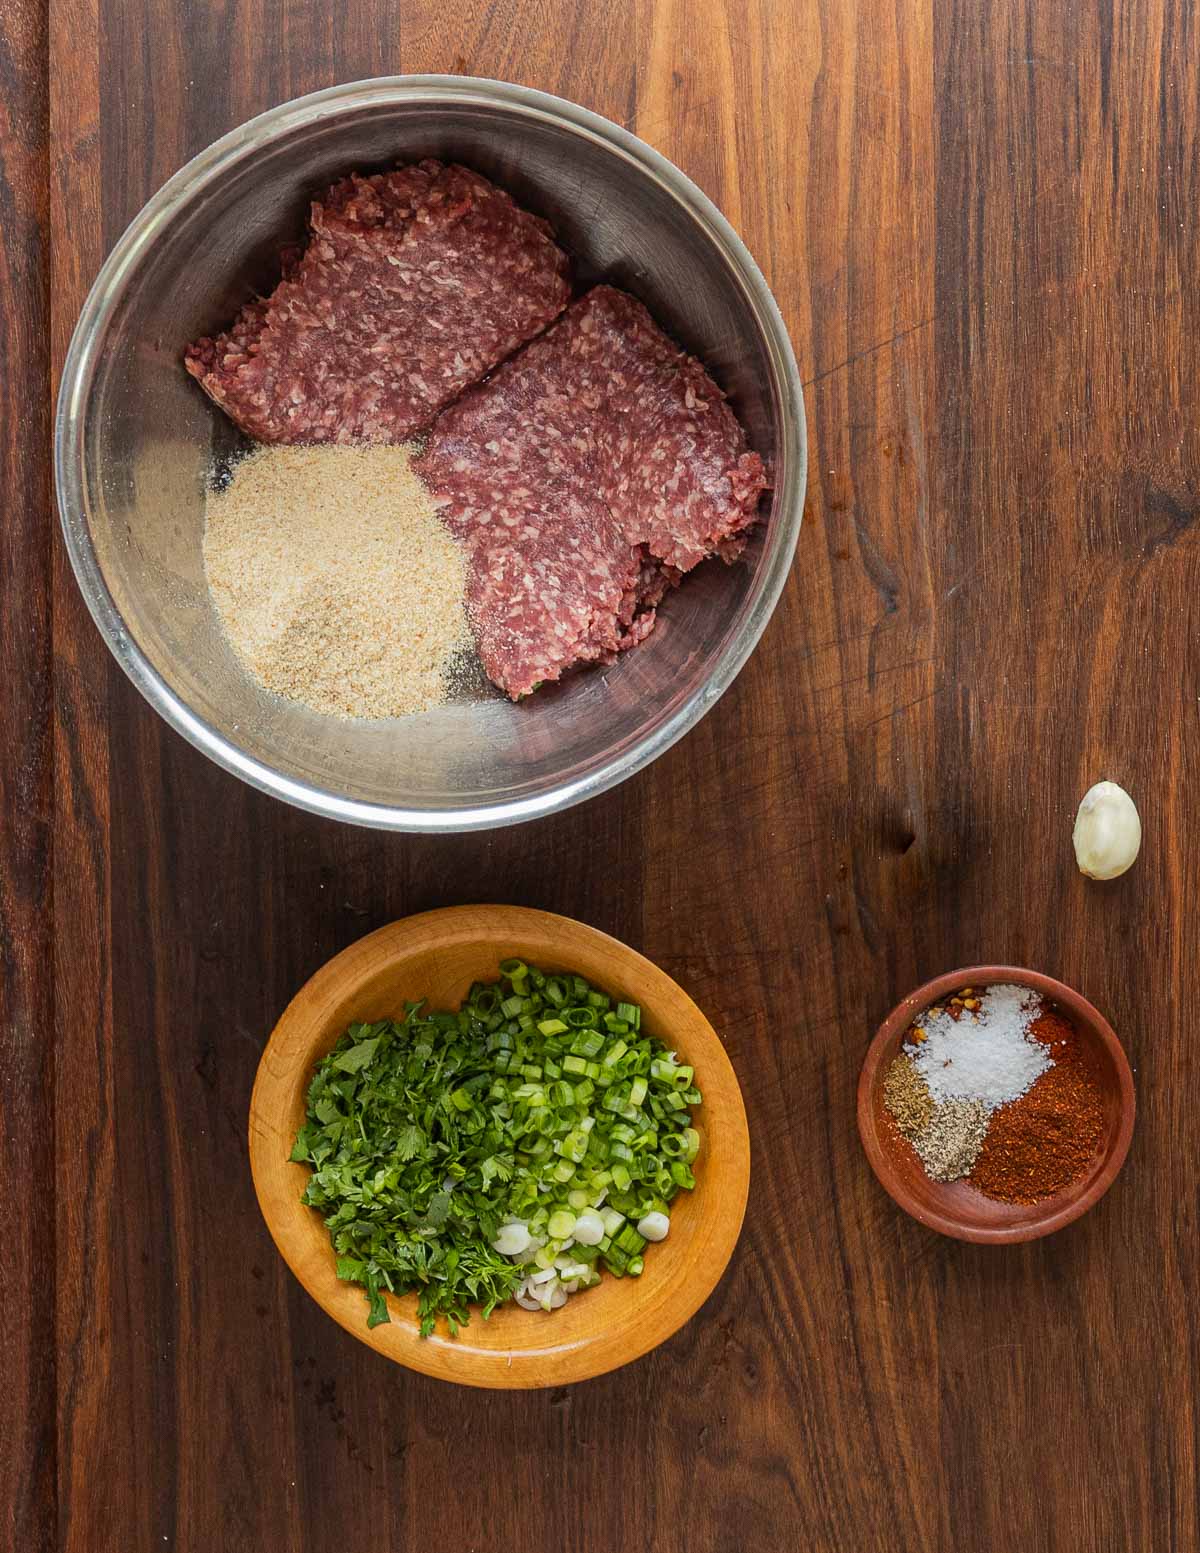 Mixing ground lamb with breadcrumbs and spices to make meatballs.